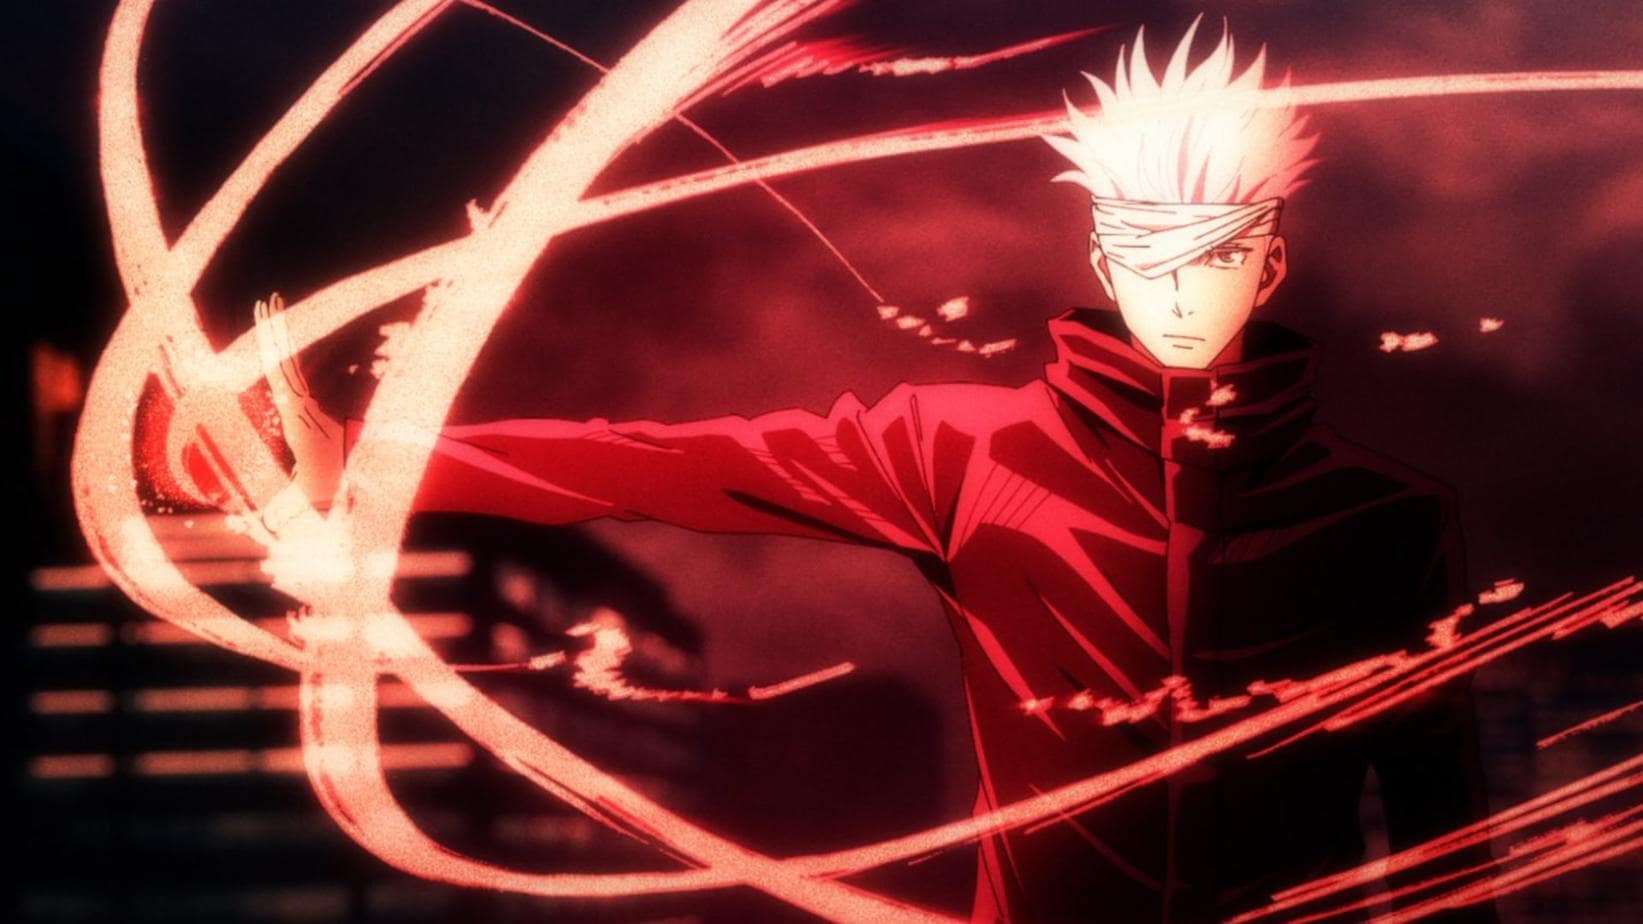 Jujutsu Kaisen 0 is the 4th highest grossing anime movie of all time in the US